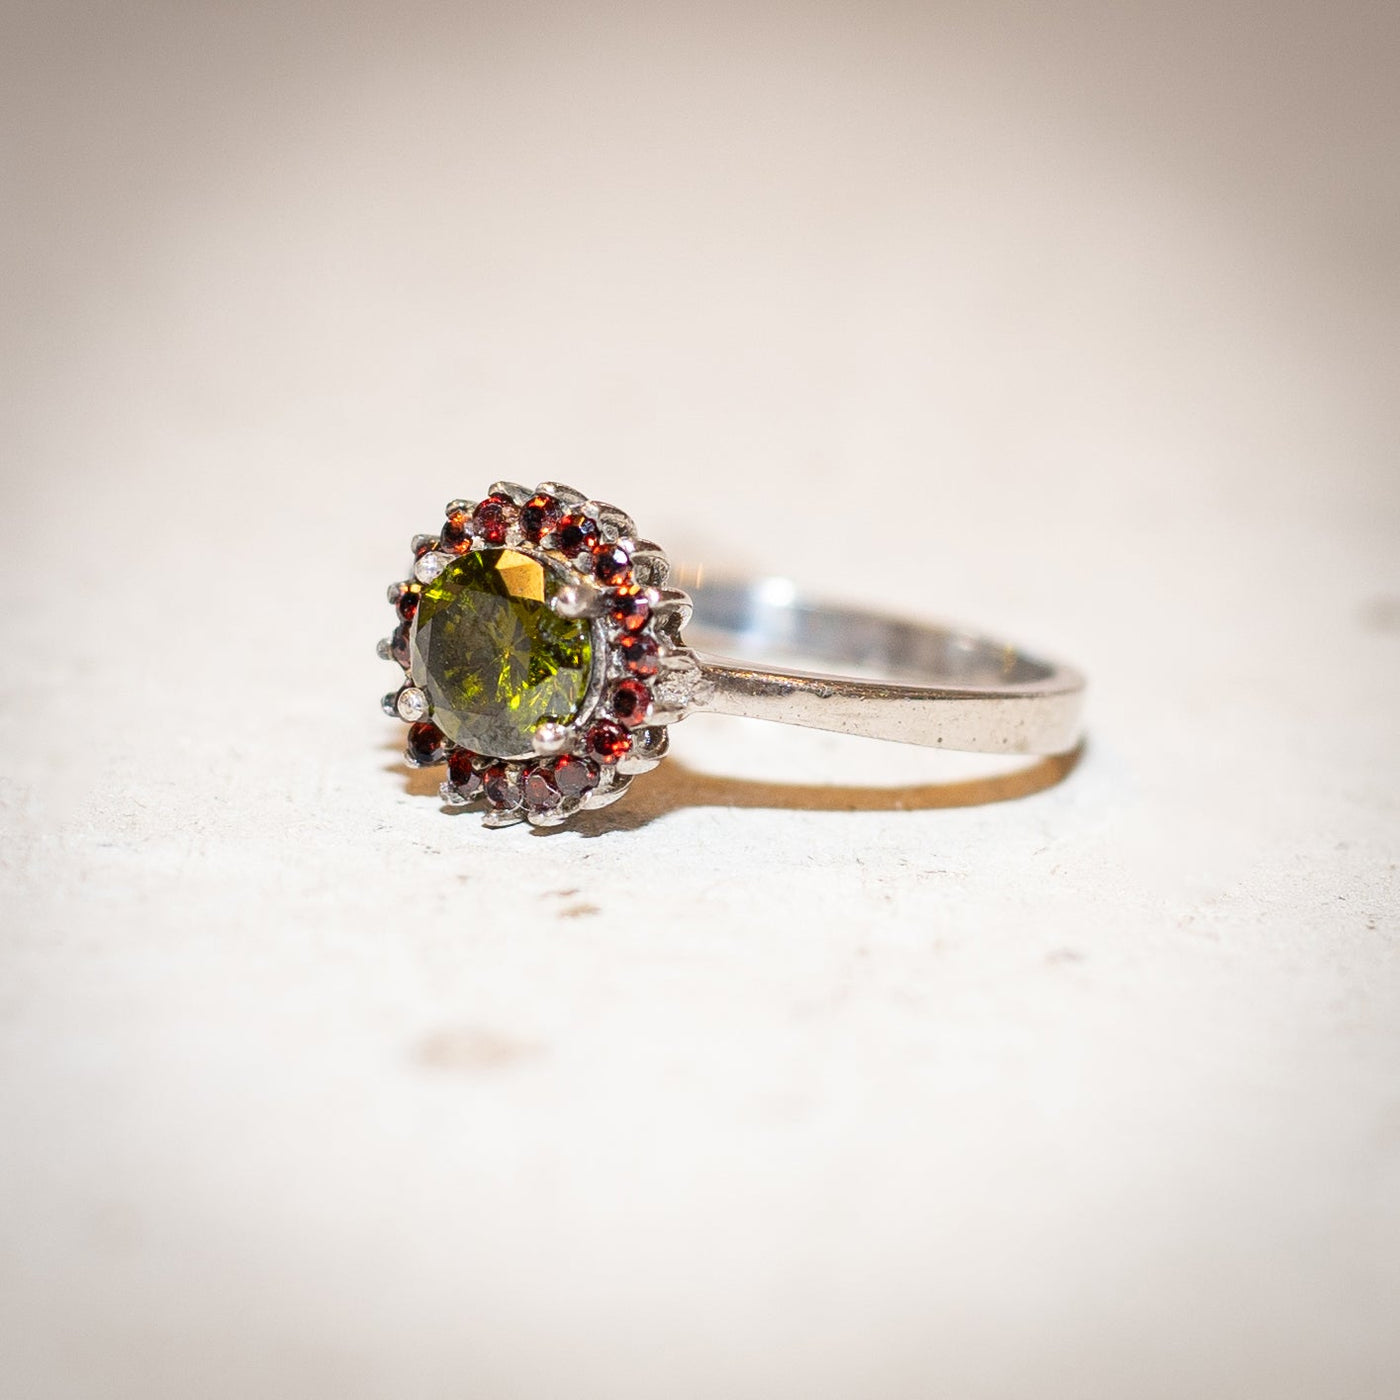 a garnet gemstone ring in sterling silver is laying on a stone